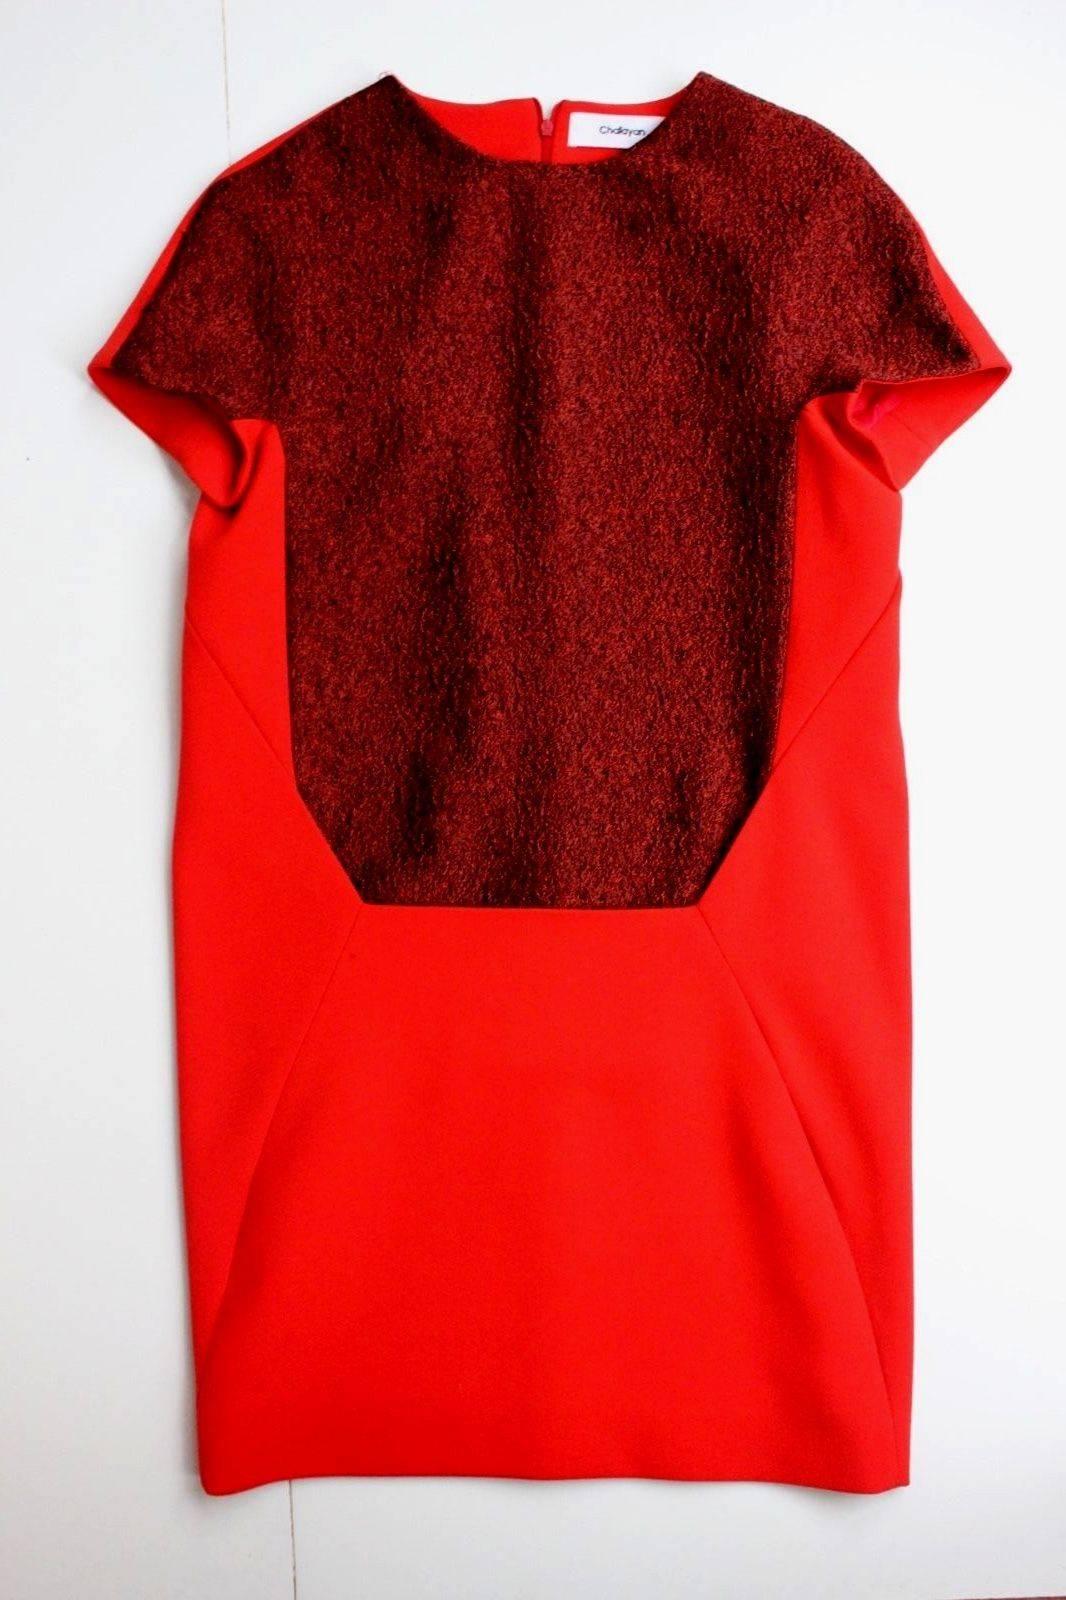 Hussein Chalayan A/W 2012 Ready-To-Wear Catwalk Red Dress I 38 uk 6   For Sale 3